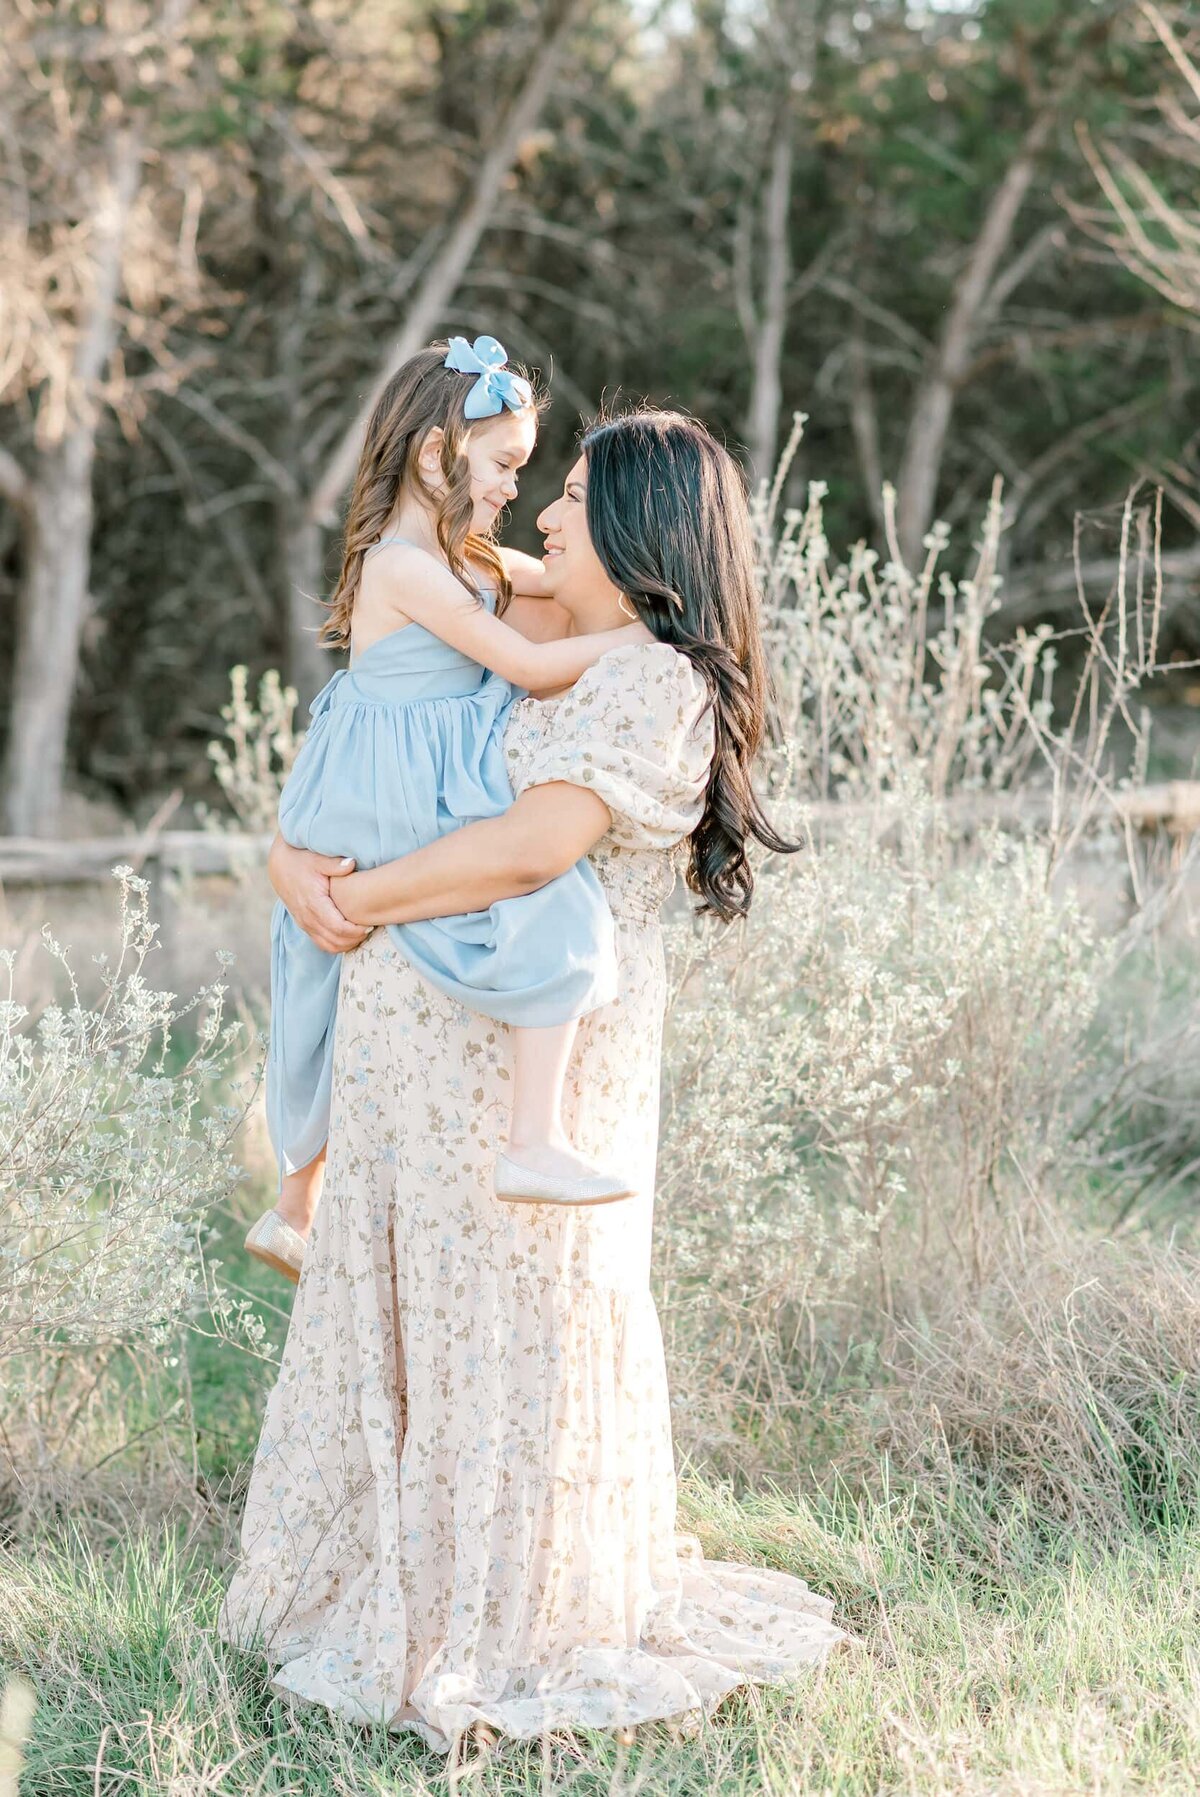 San-Antonio-Maternity-Photography-3.4.23- Melanie_s Maternity Session- Laurie Adalle Photography-25